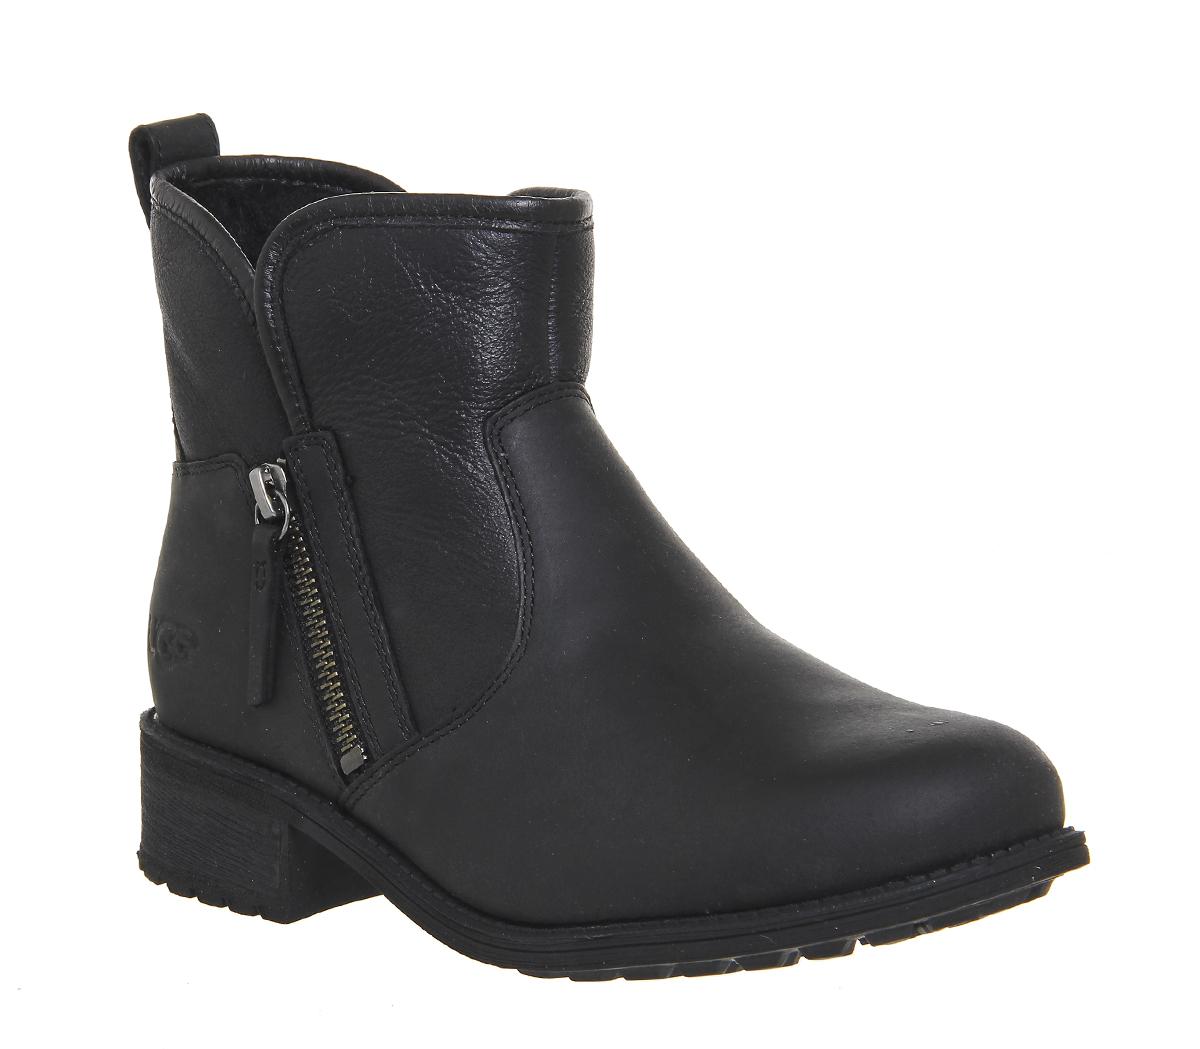 black leather ugg boots womens